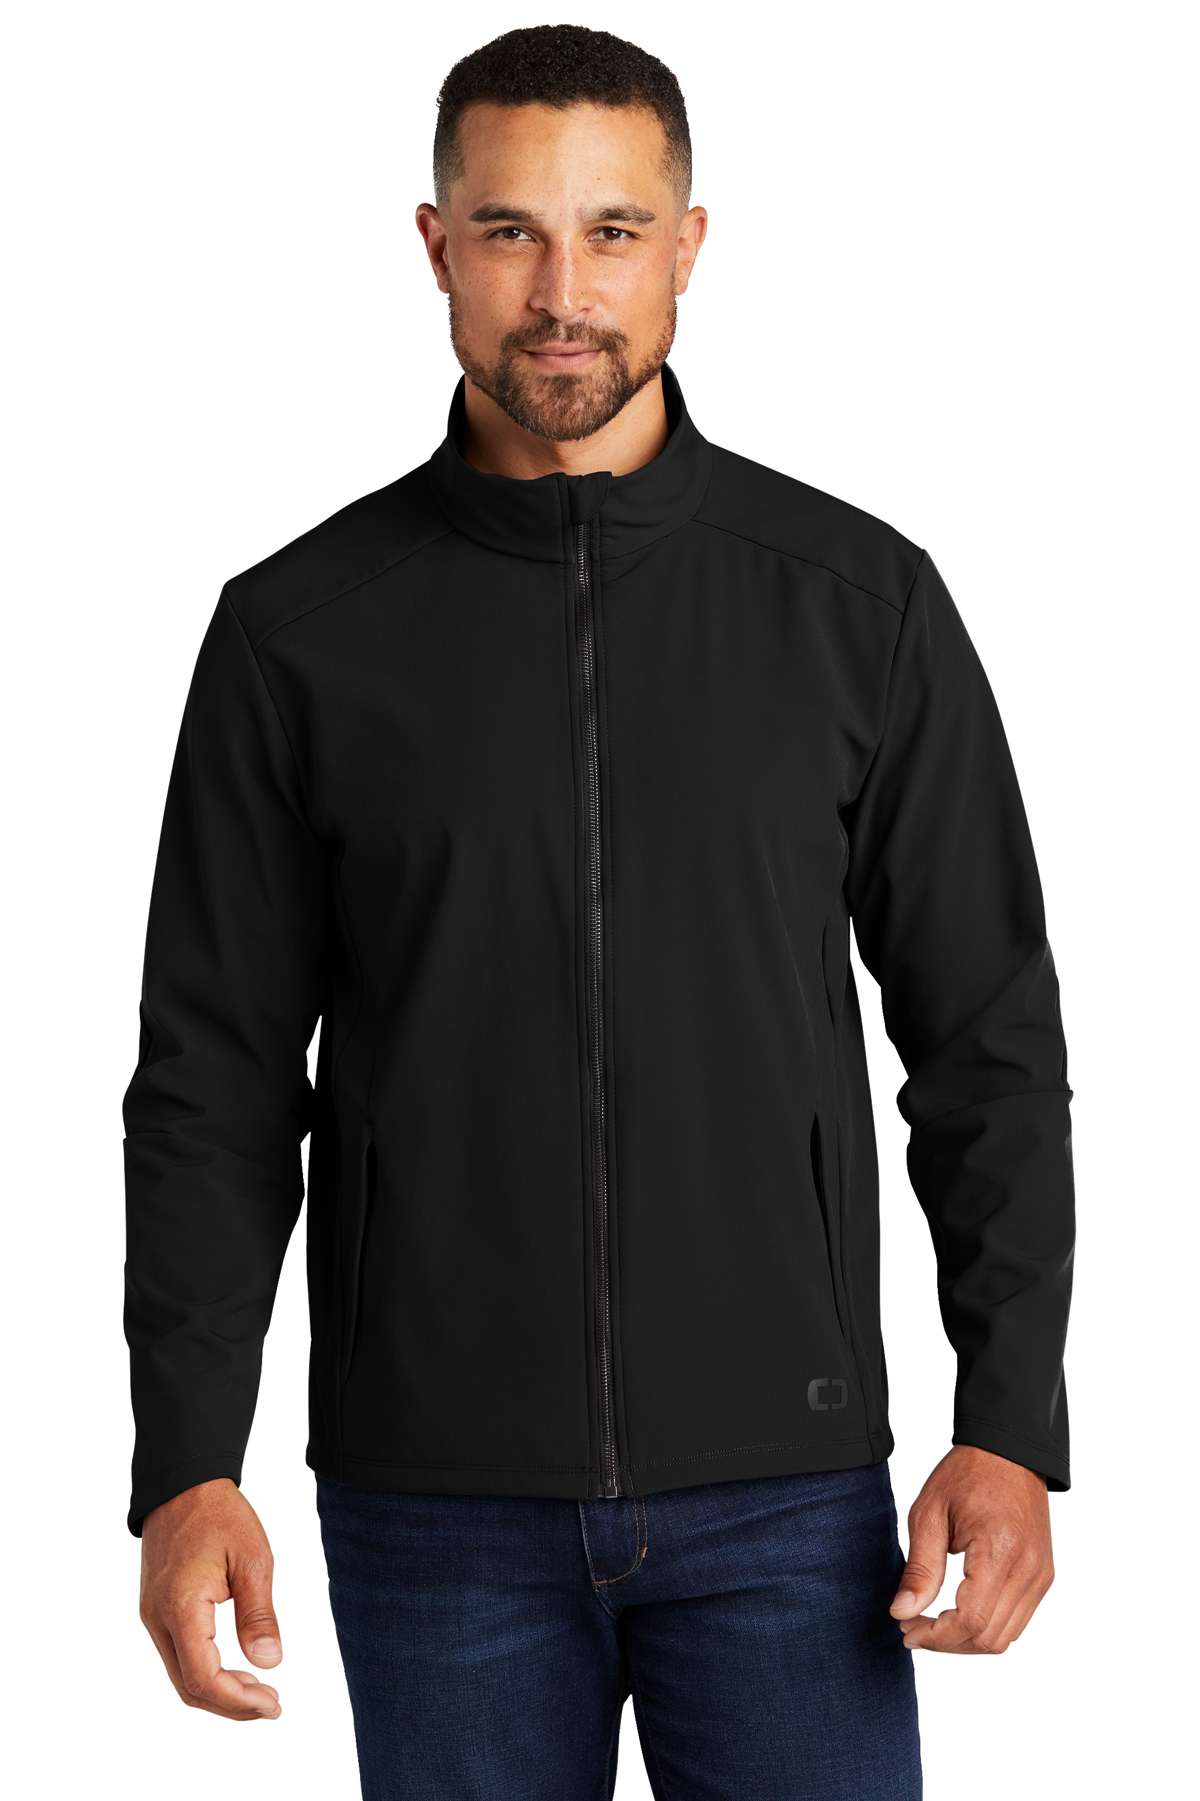 OGIO Commuter Full-Zip Soft Shell | Product | Company Casuals